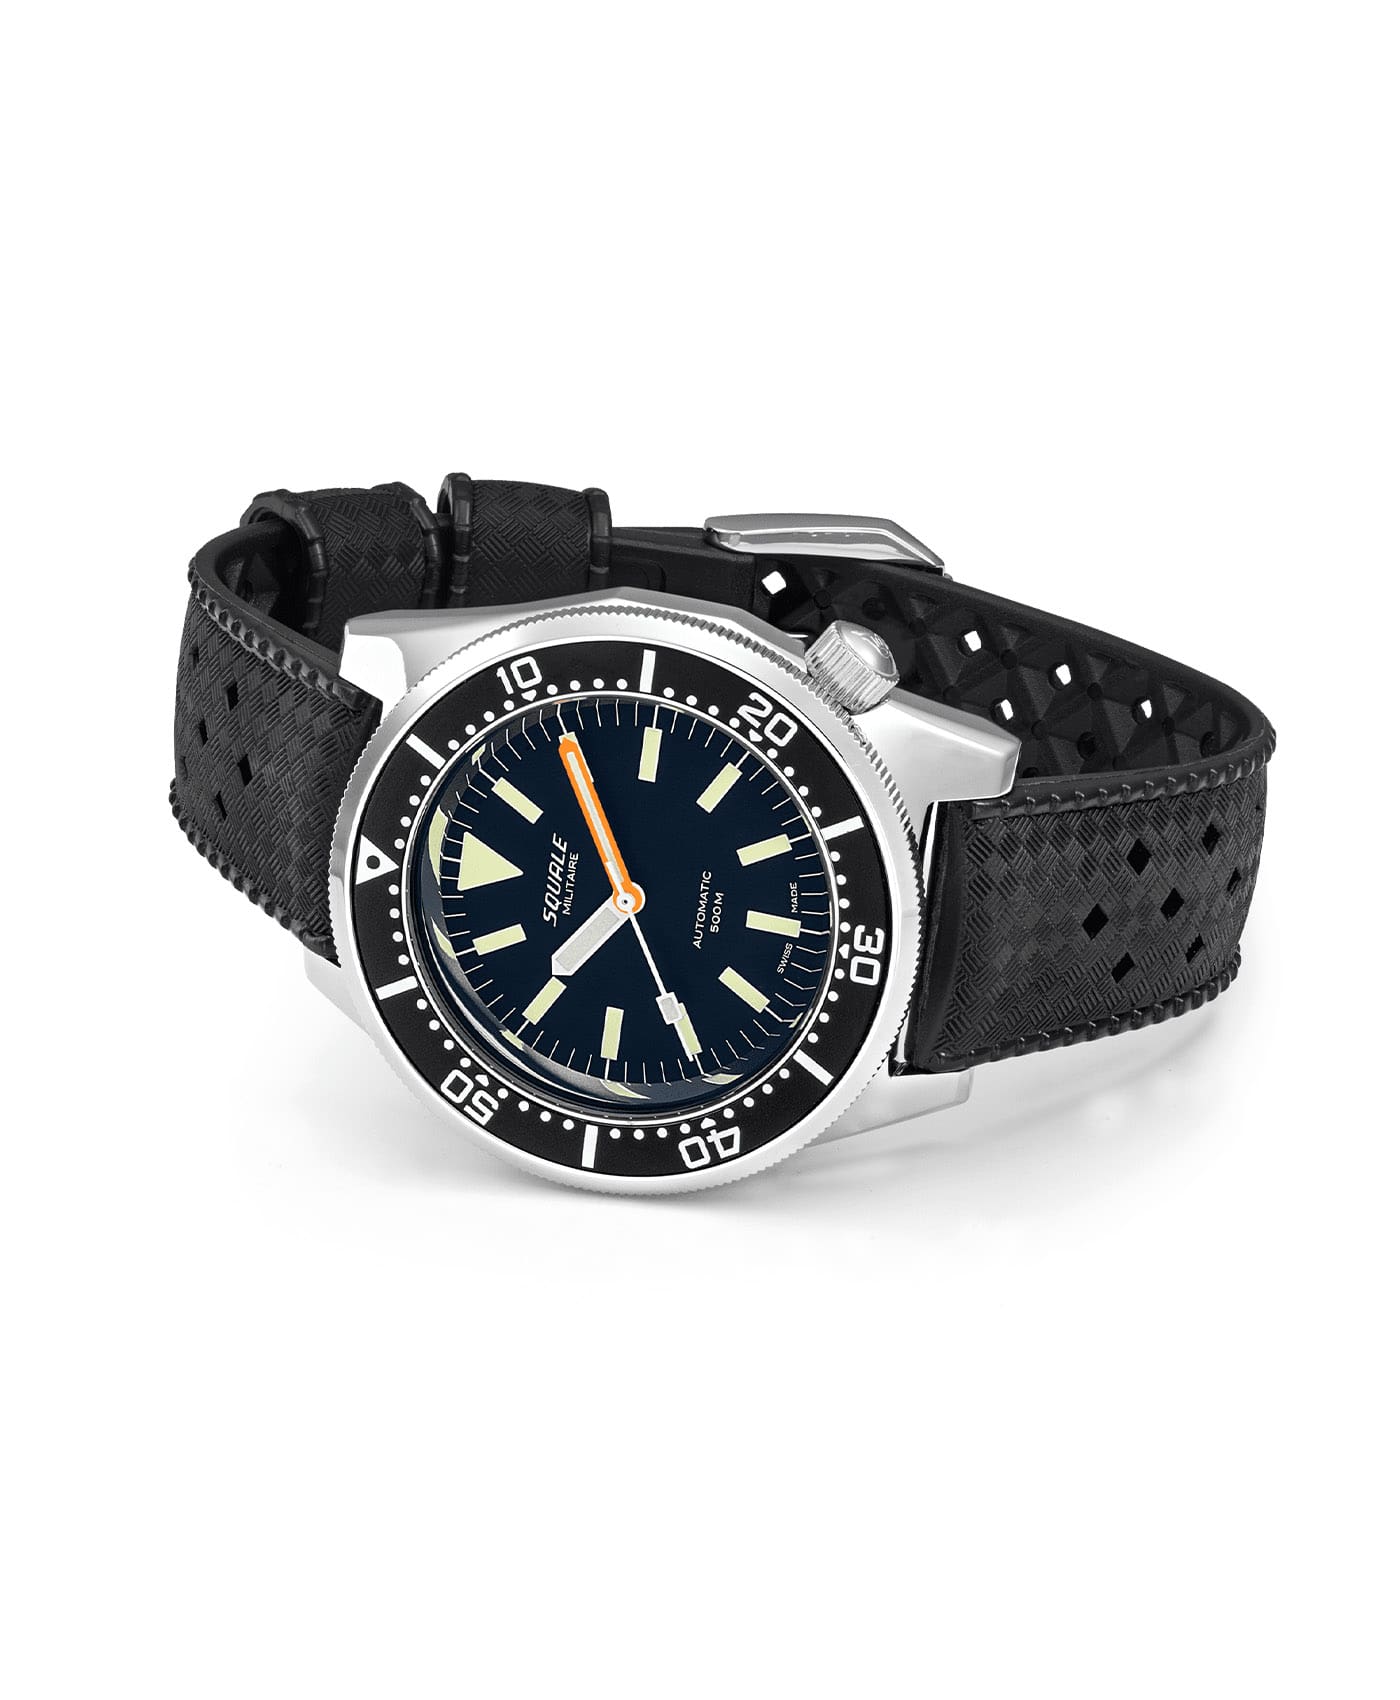 Squale - 1521 Black Militaire - Polished - Rubber - 1521MIL.HT-side-min